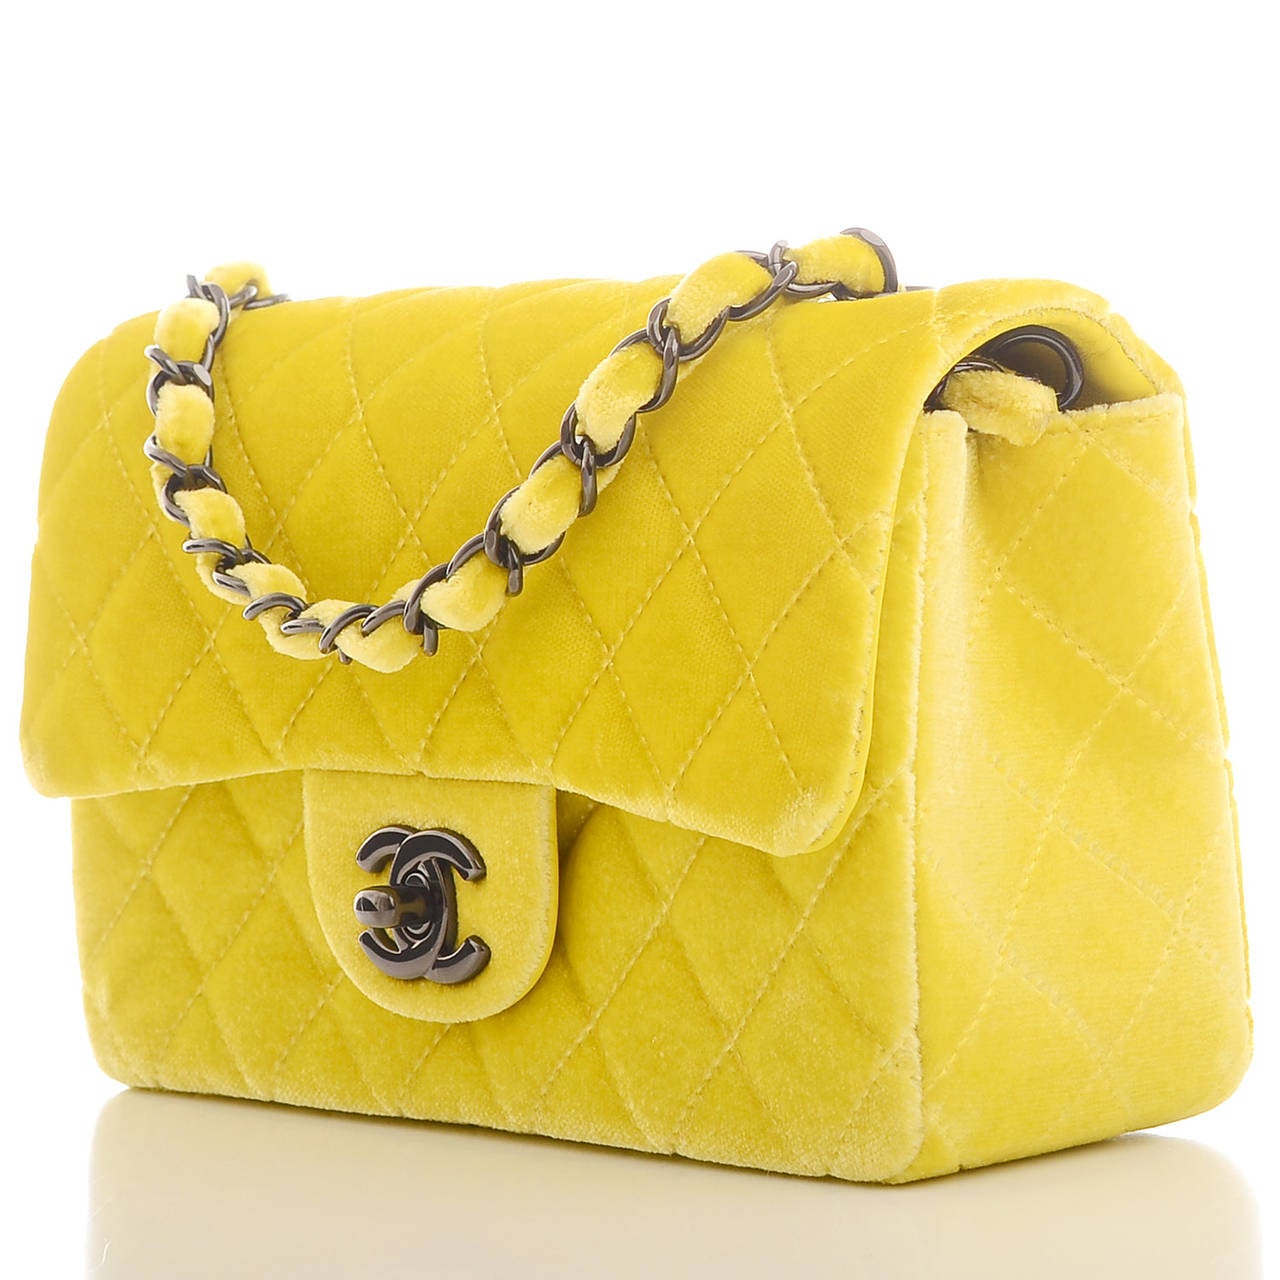 Chanel yellow Small Classic 2.55 flap bag of quilted velvet with black metal hardware.

Named 2.55 to honor the bag's creation in February 1955, the iconic Chanel bag was a modification of the bag Coco Chanel originally designed in 1929.